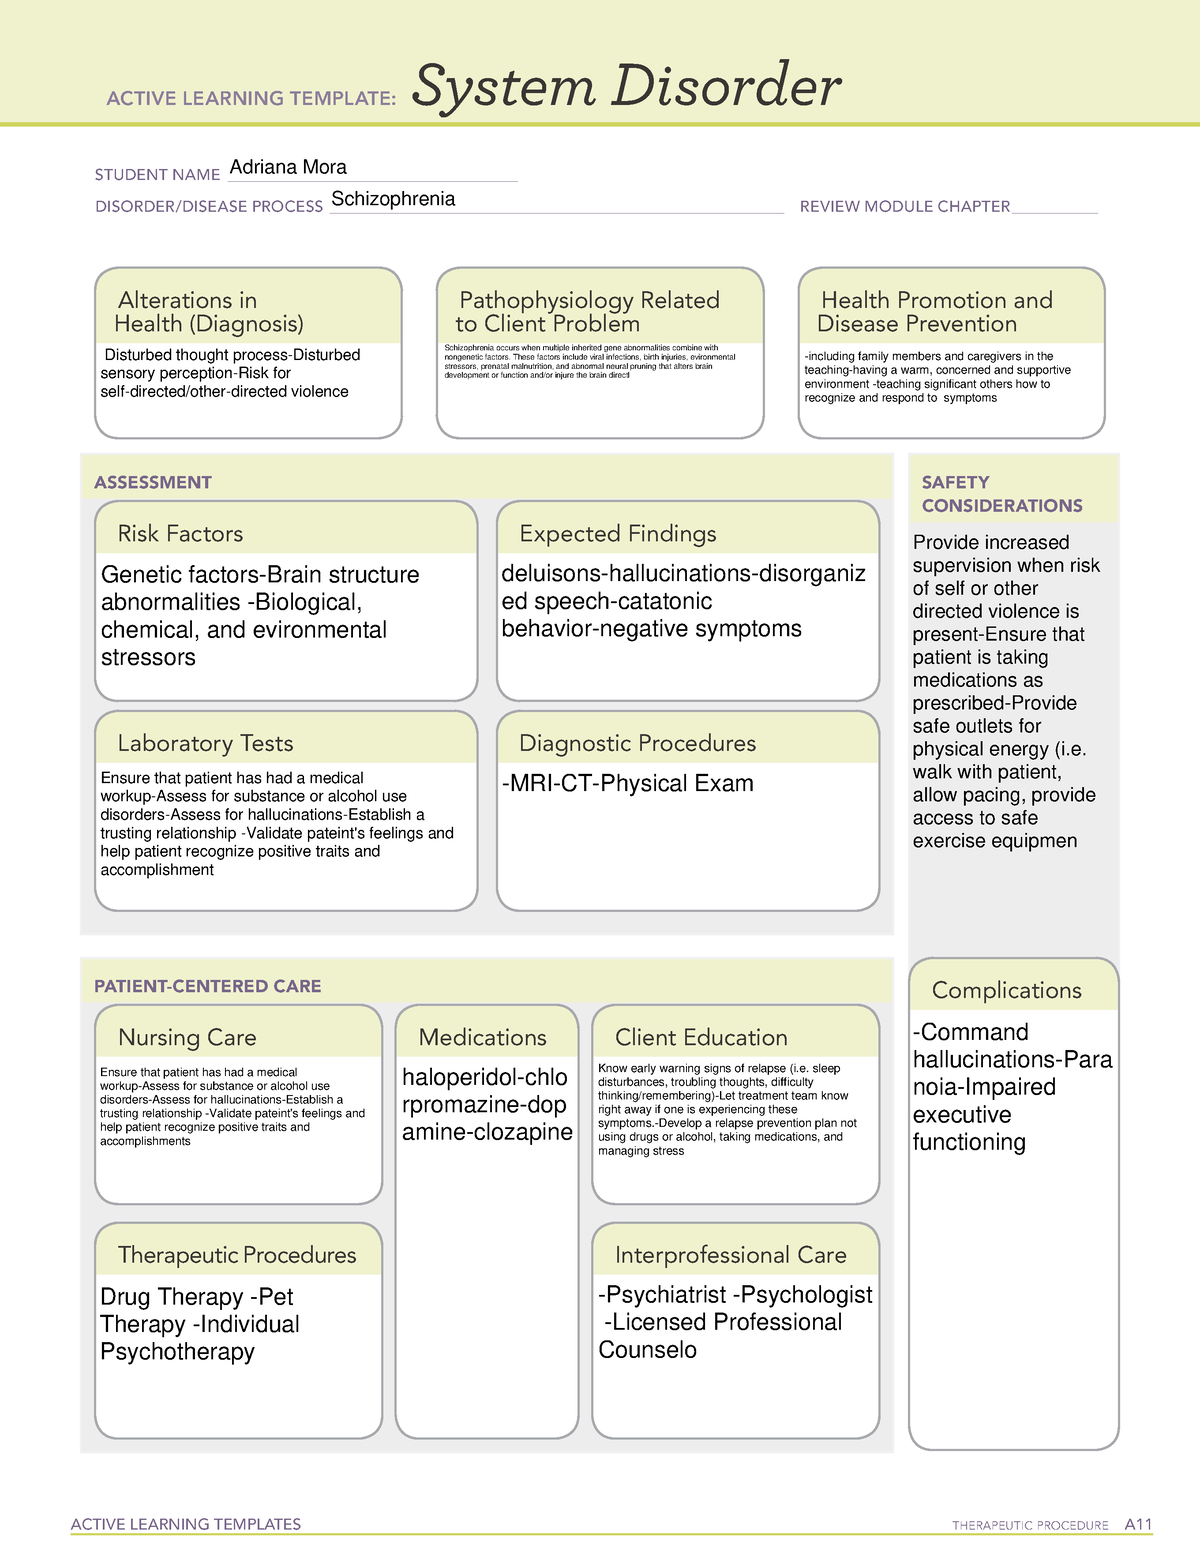 Schizophrenia SD system disorder template ACTIVE LEARNING TEMPLATES